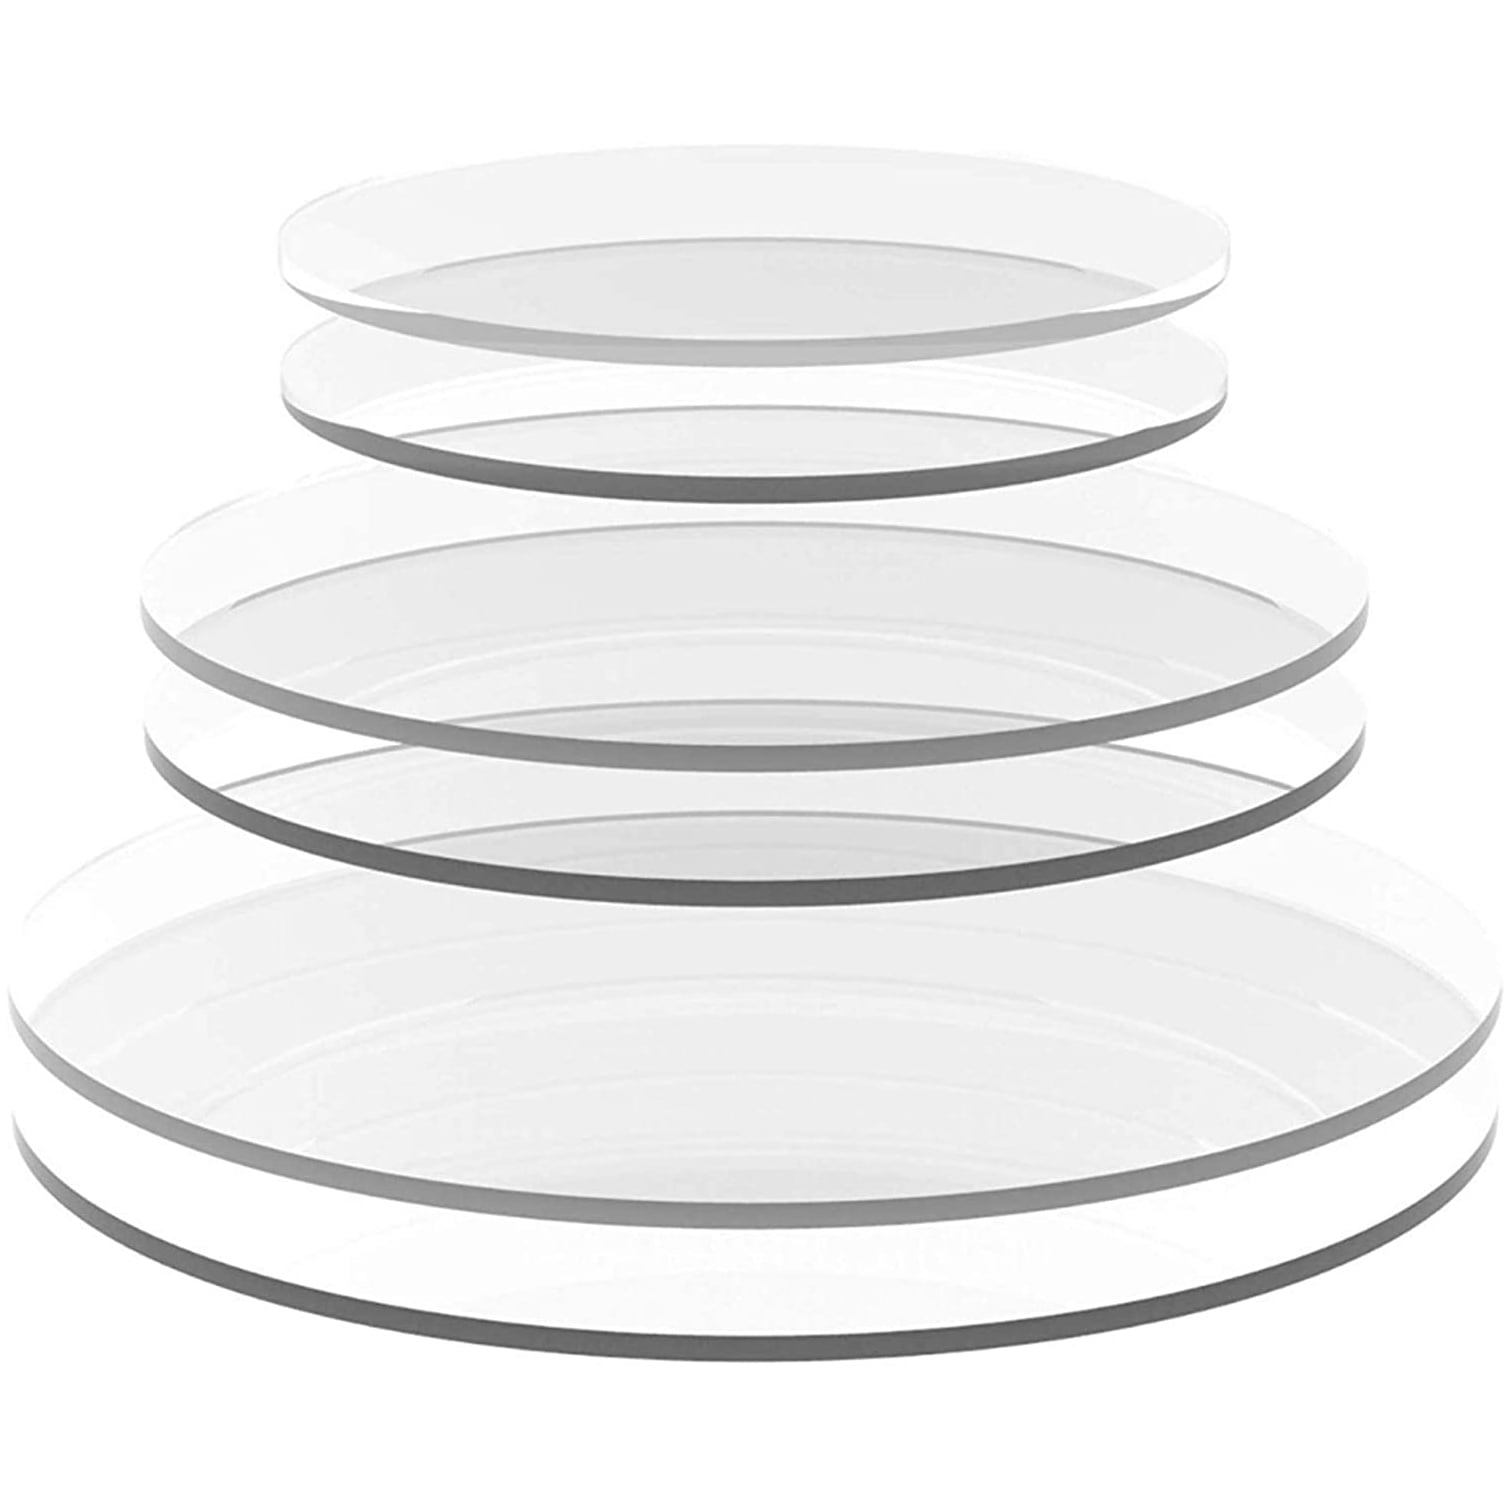 uxcell Acrylic Sheet Circle Round Disc,Clear,3mm Thick,9 Diameter,Acrylic Round Sheet 220mm 